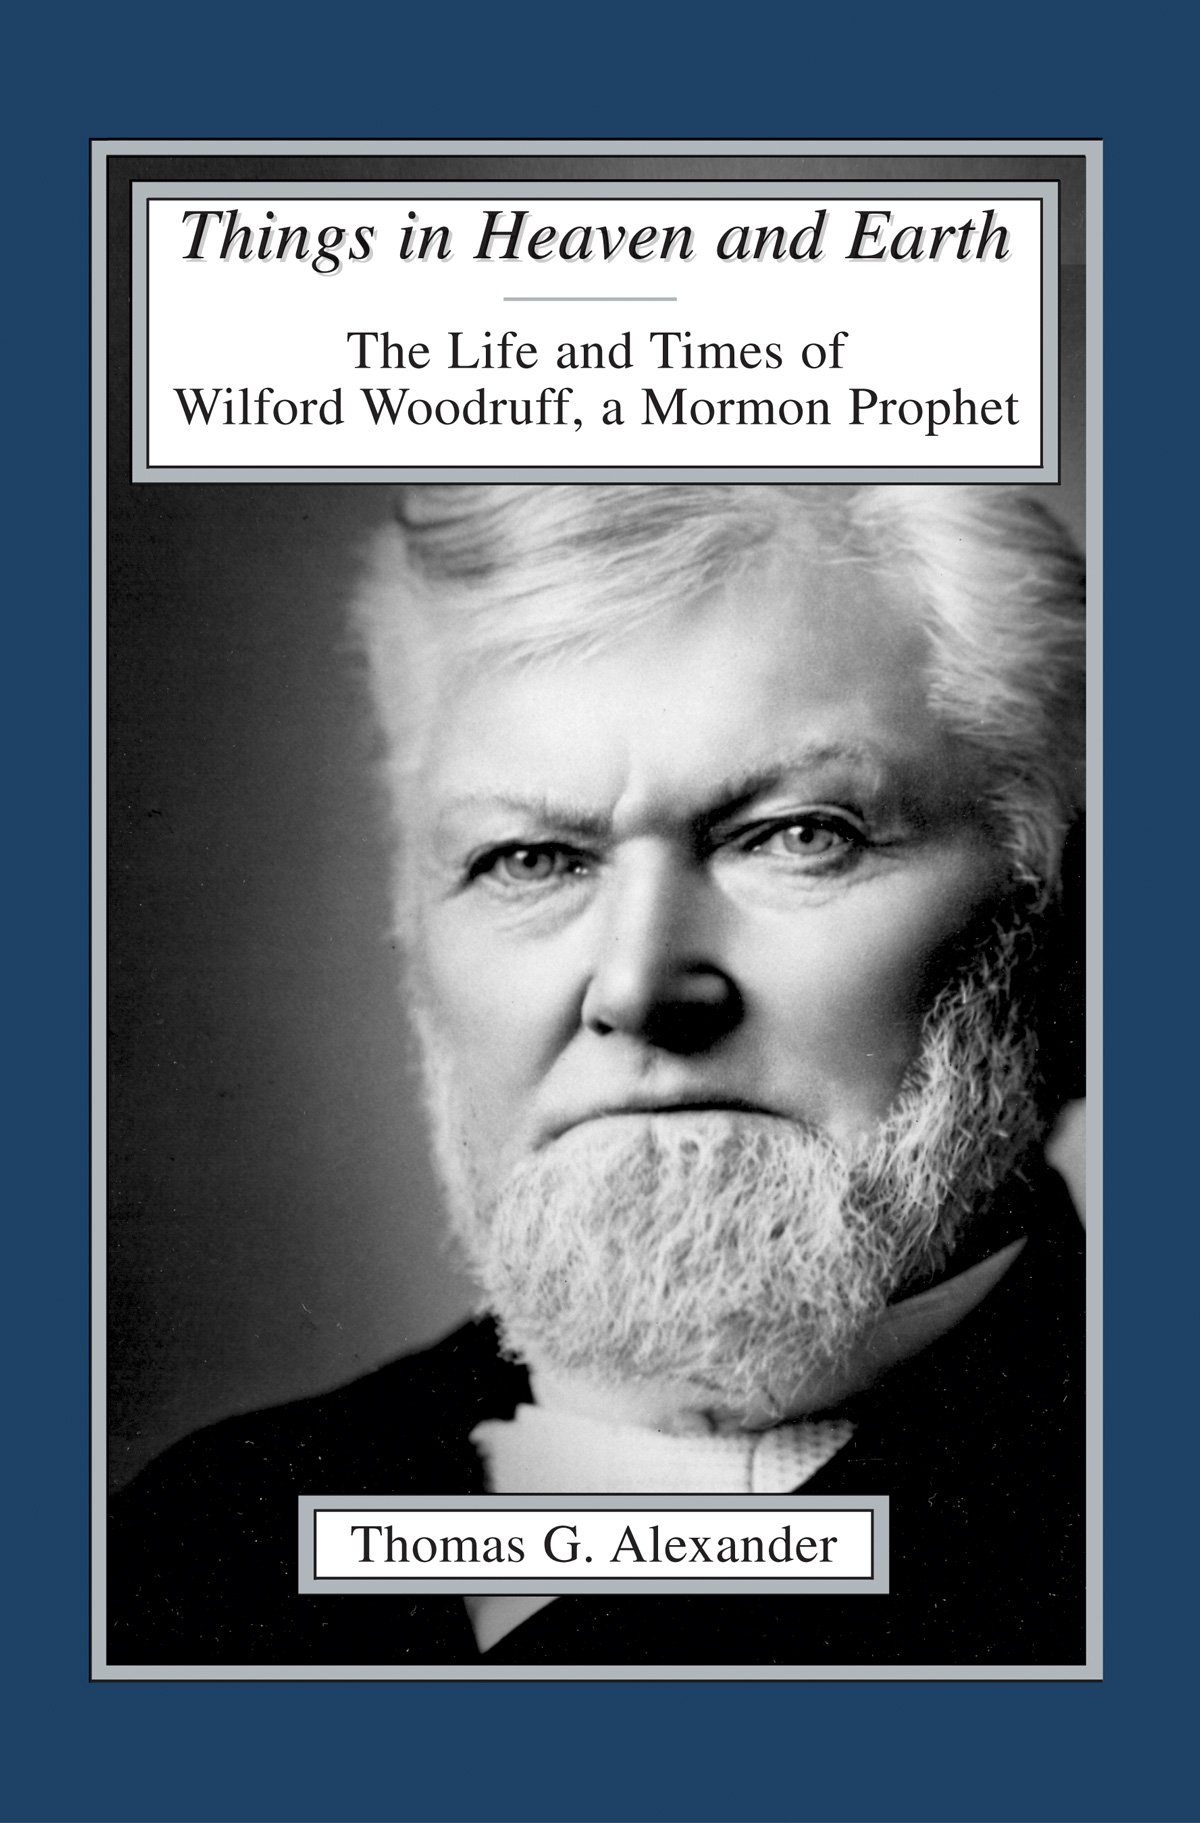 Image for THINGS IN HEAVEN AND EARTH - The Life and Times of Wilford Woodruff, a Mormon Prophet